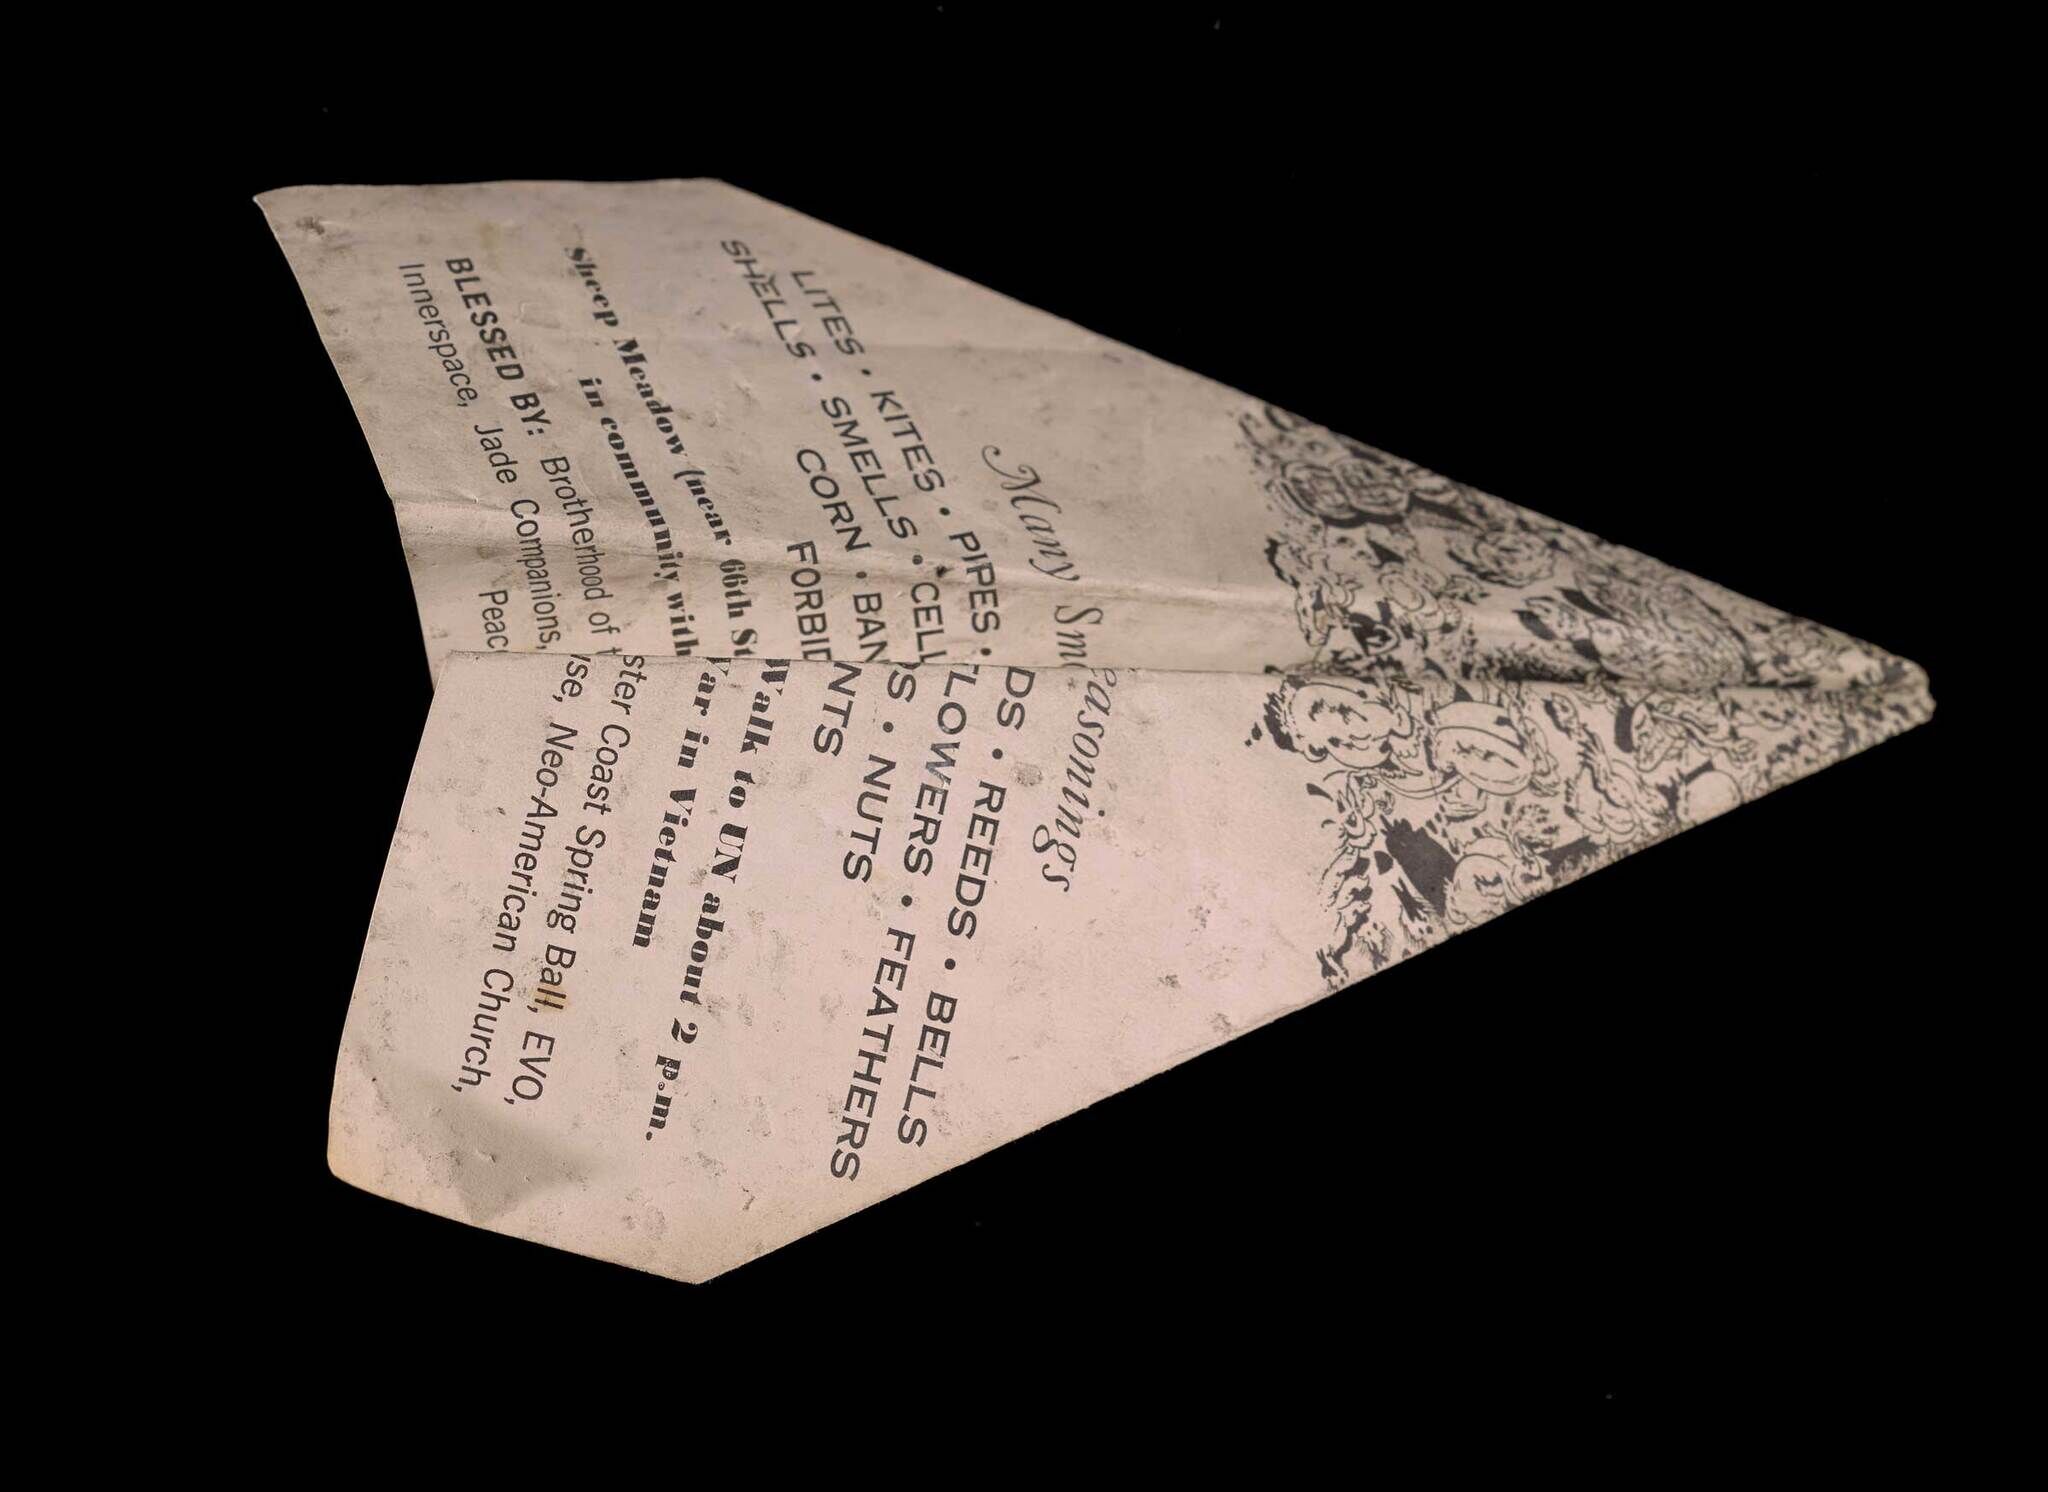 A sheet of white paper with black ink writing and drawings on it that has been folded into a paper airplane